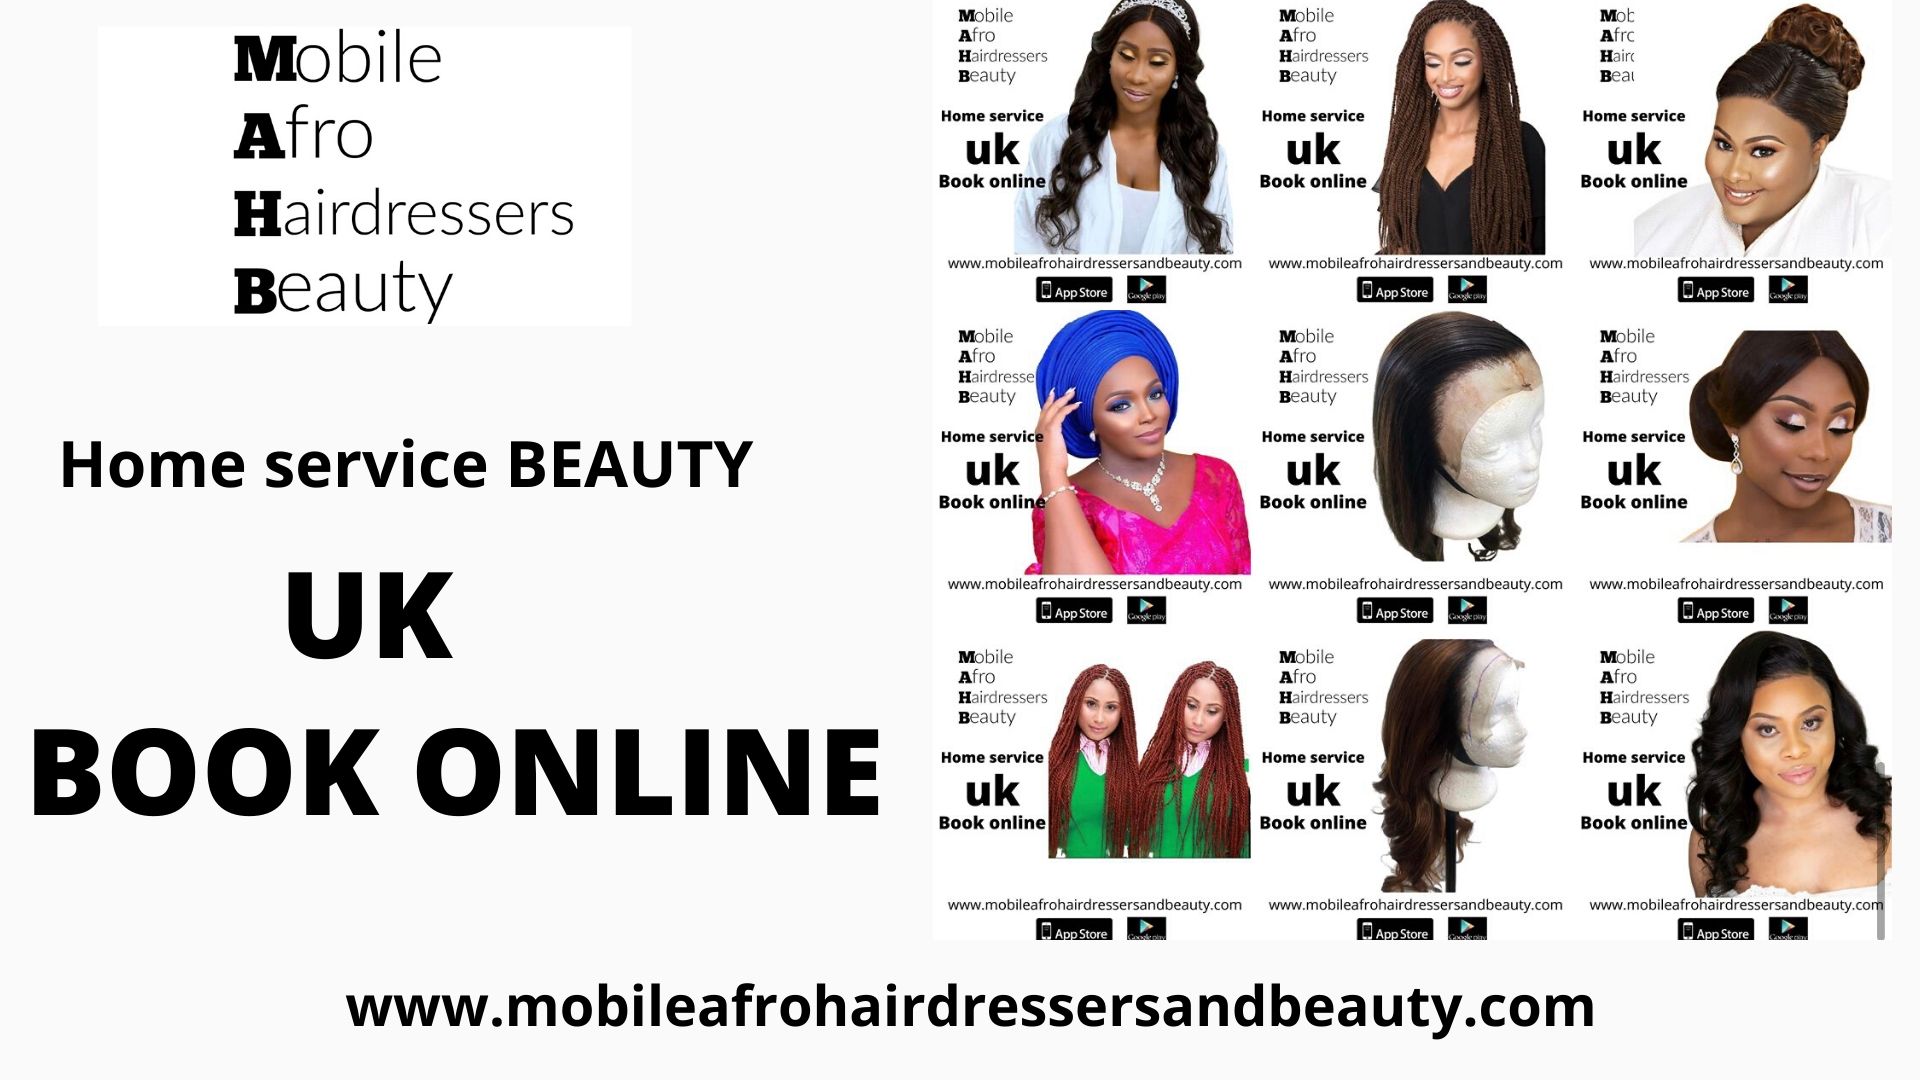 WANTED IN THE UK !! MOBILE AFRO HAIRDRESSERS /MOBILE MAKEUP ARTIST /MOBILE  SALON VACANCY – MAHB